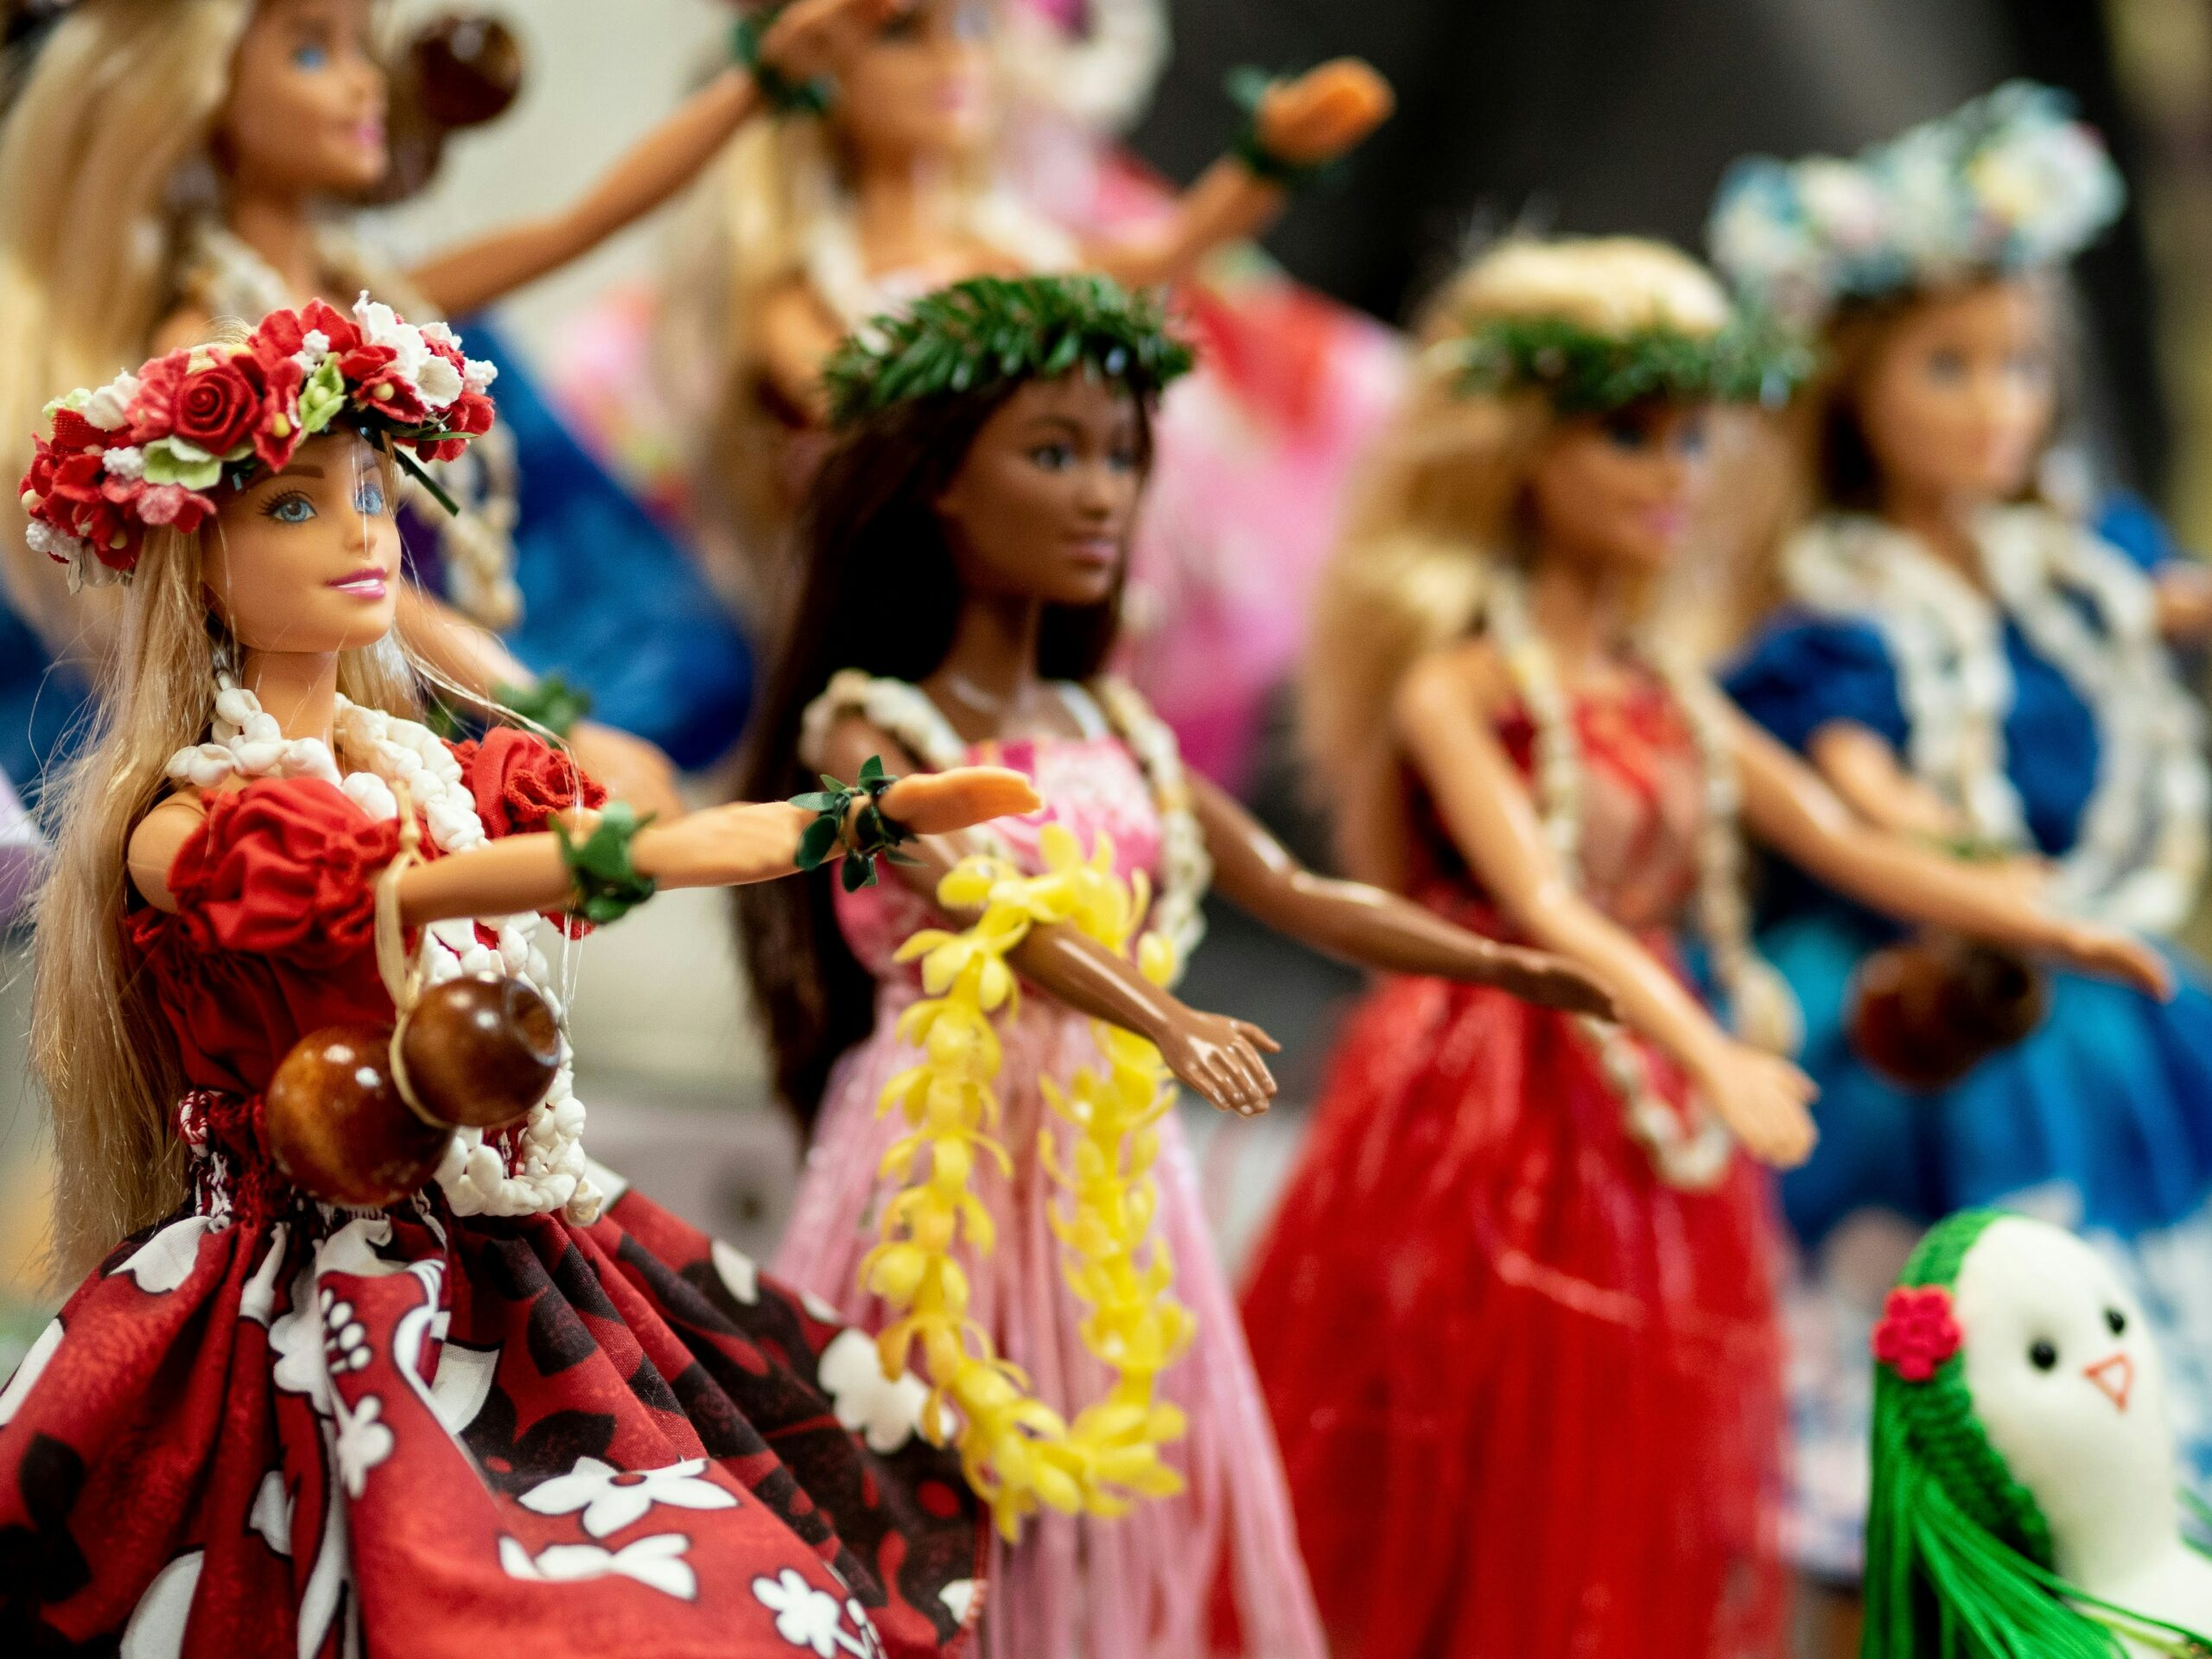 Attend Barbie Conventions and Events